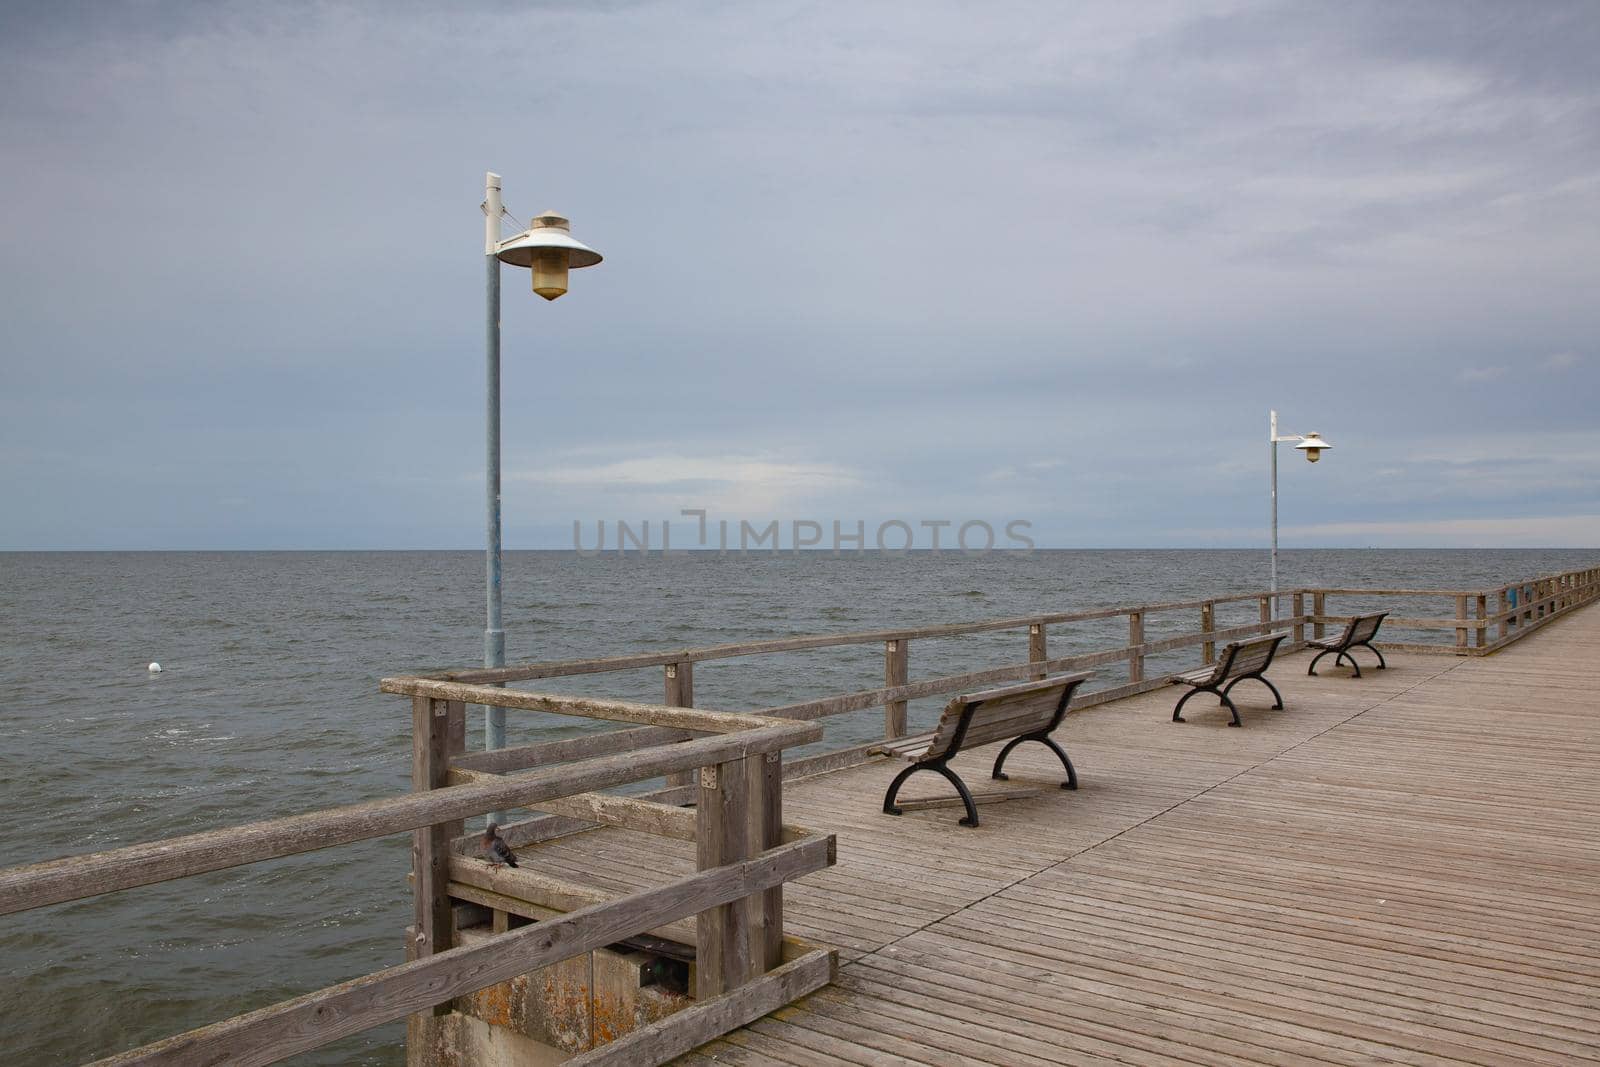 Bansin Pier is a pier located in the coastal resort of Bansin, on the island of Usedom.The pier stretches out from the Imperial Beach for 285 metres into the Baltic Sea.